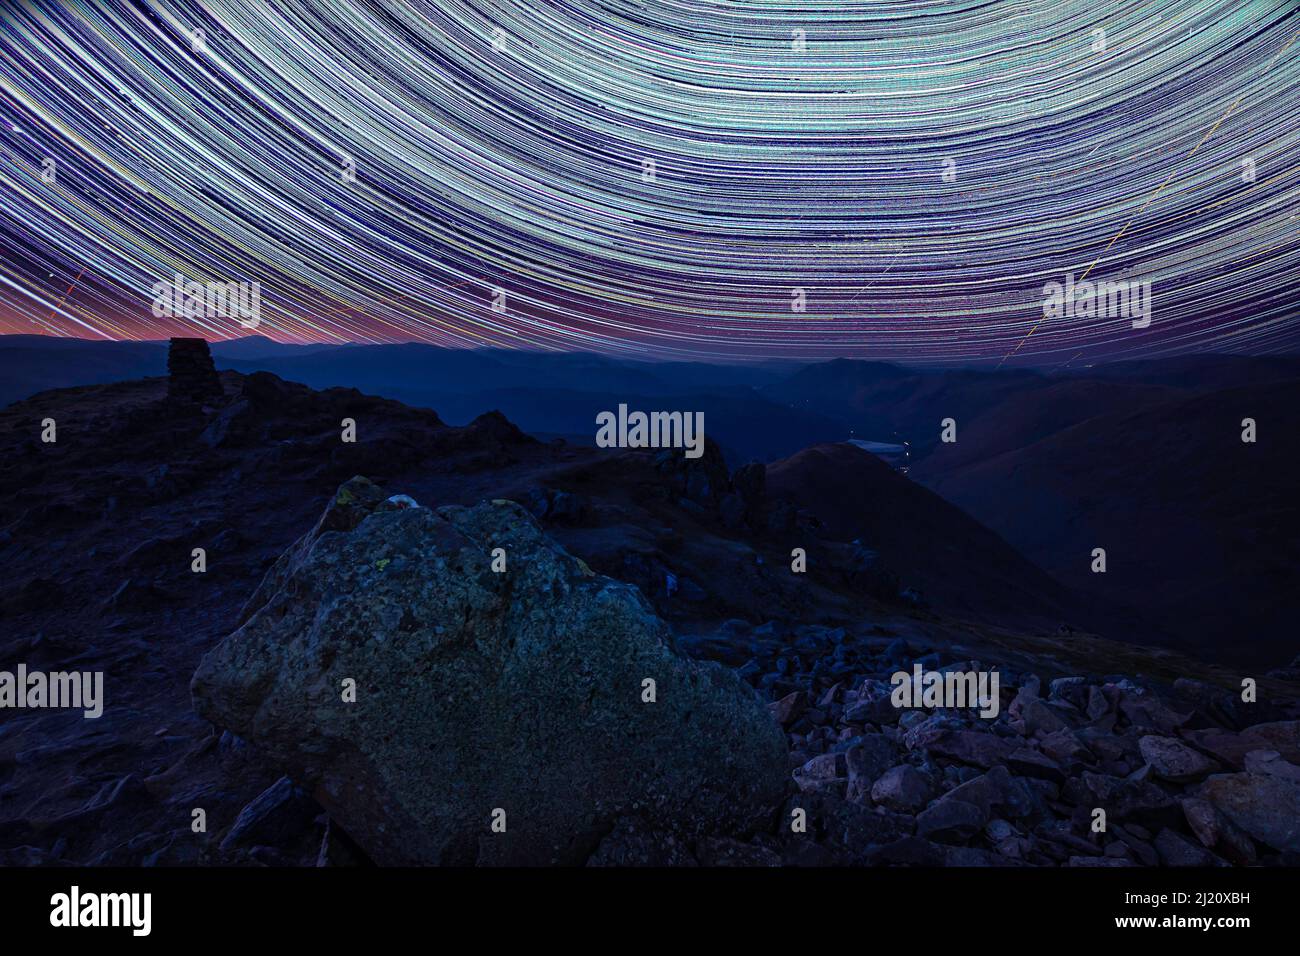 Star trails on Red Screes in Lake District, Cumbria, UK. Beautiful nightscape scene in the mountains. Night under the stars. Stock Photo